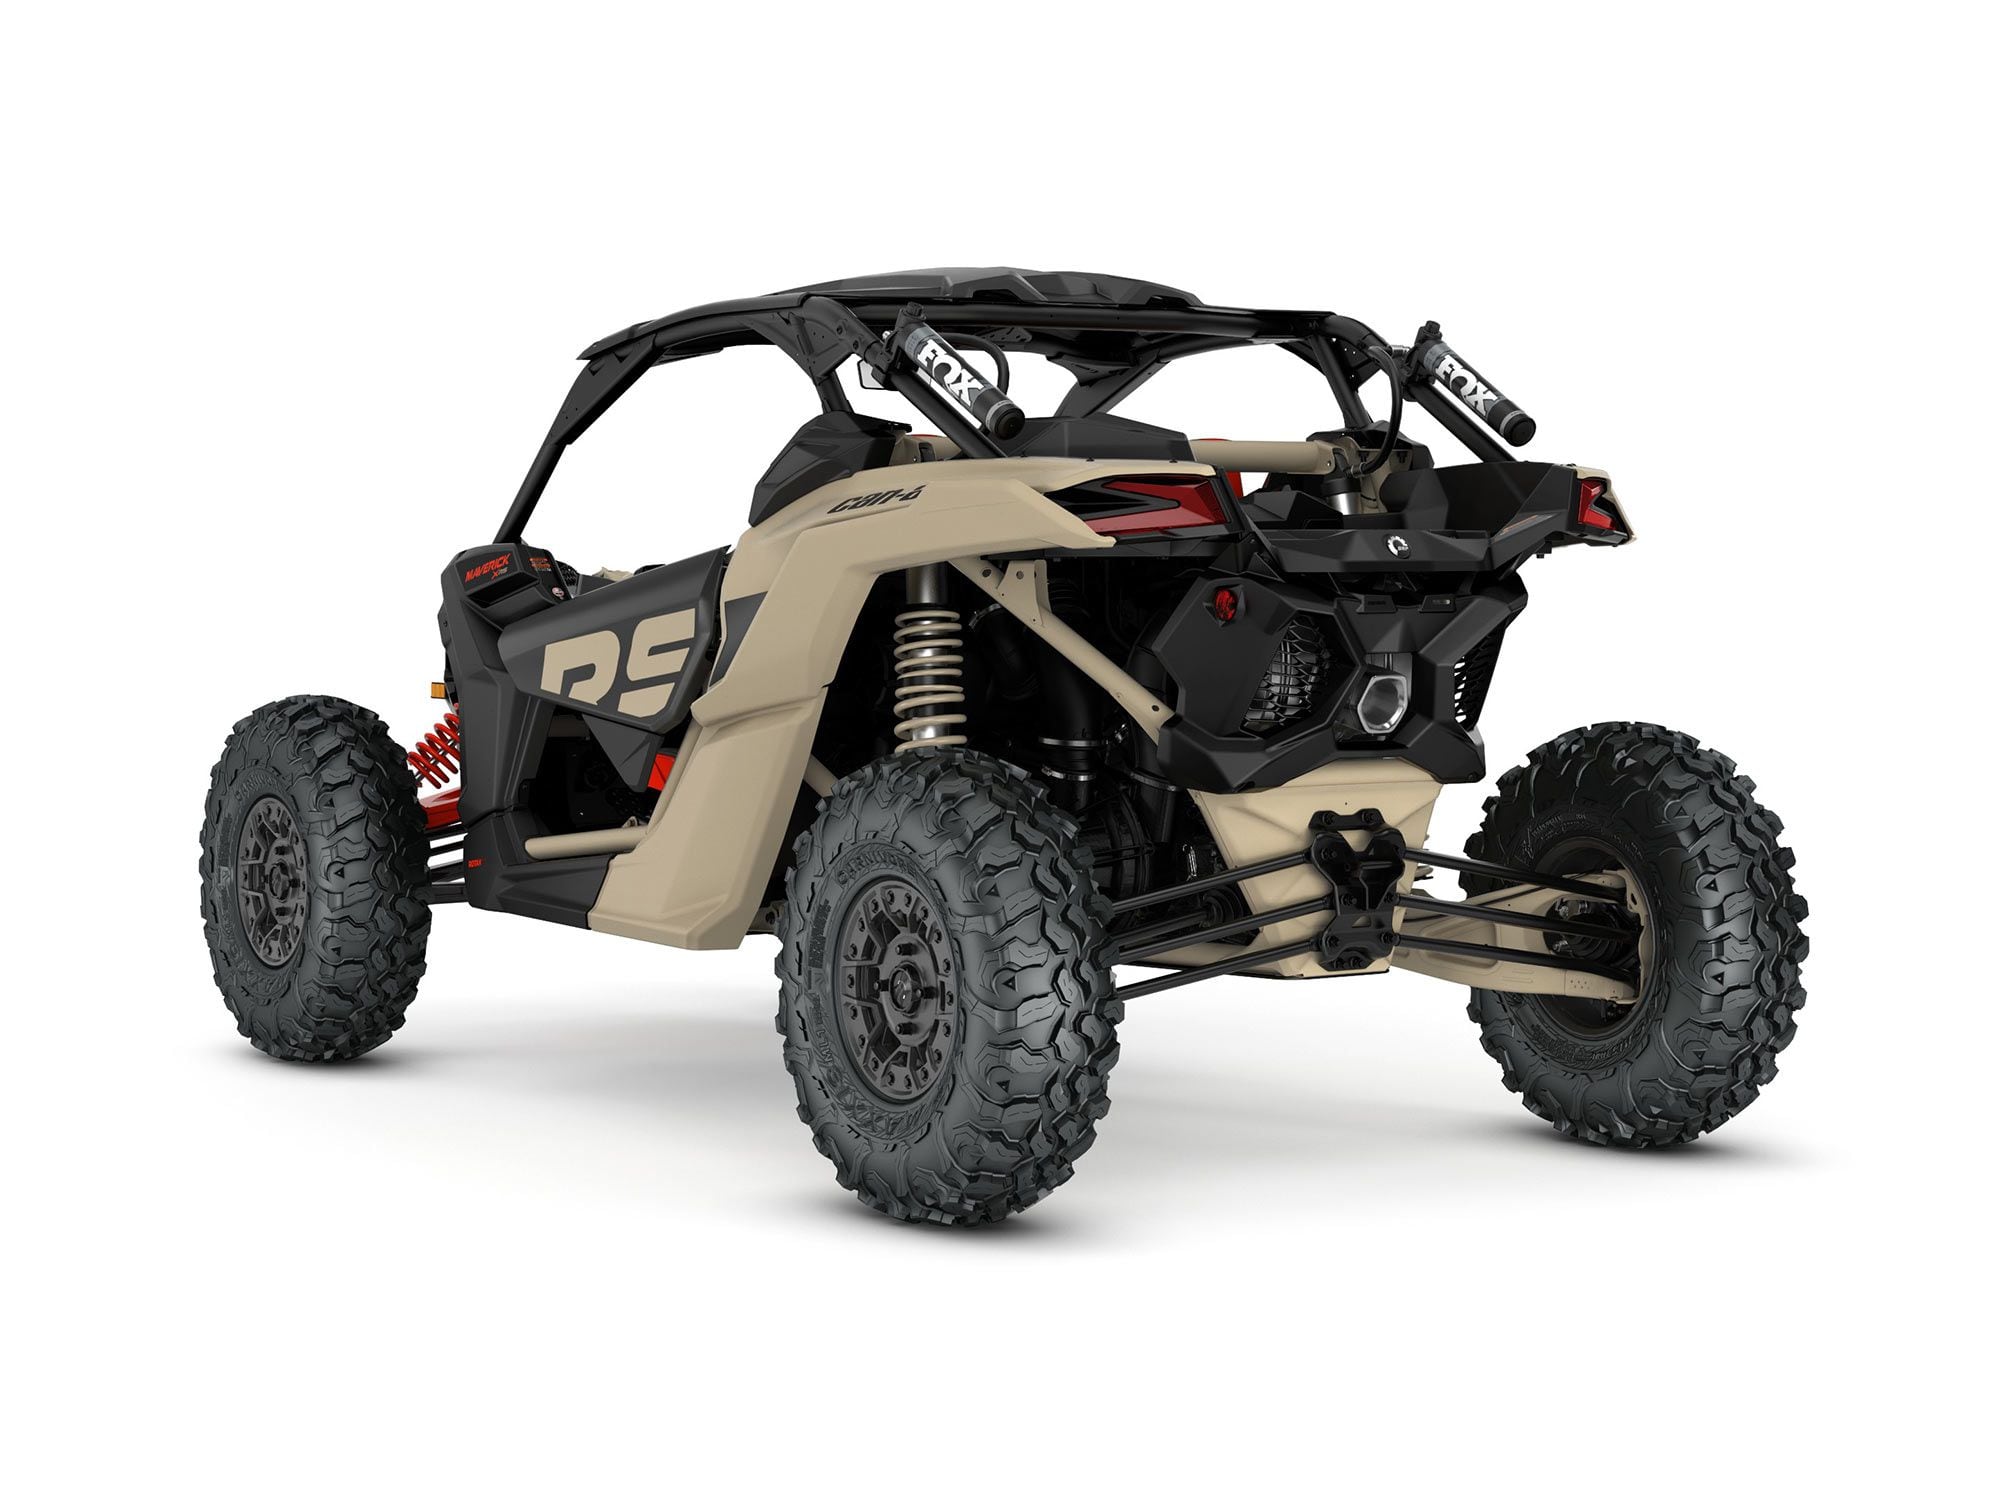 2022 Can-Am Maverick X3 X RS Turbo RR rear view in Desert Tan and Carbon Black color.